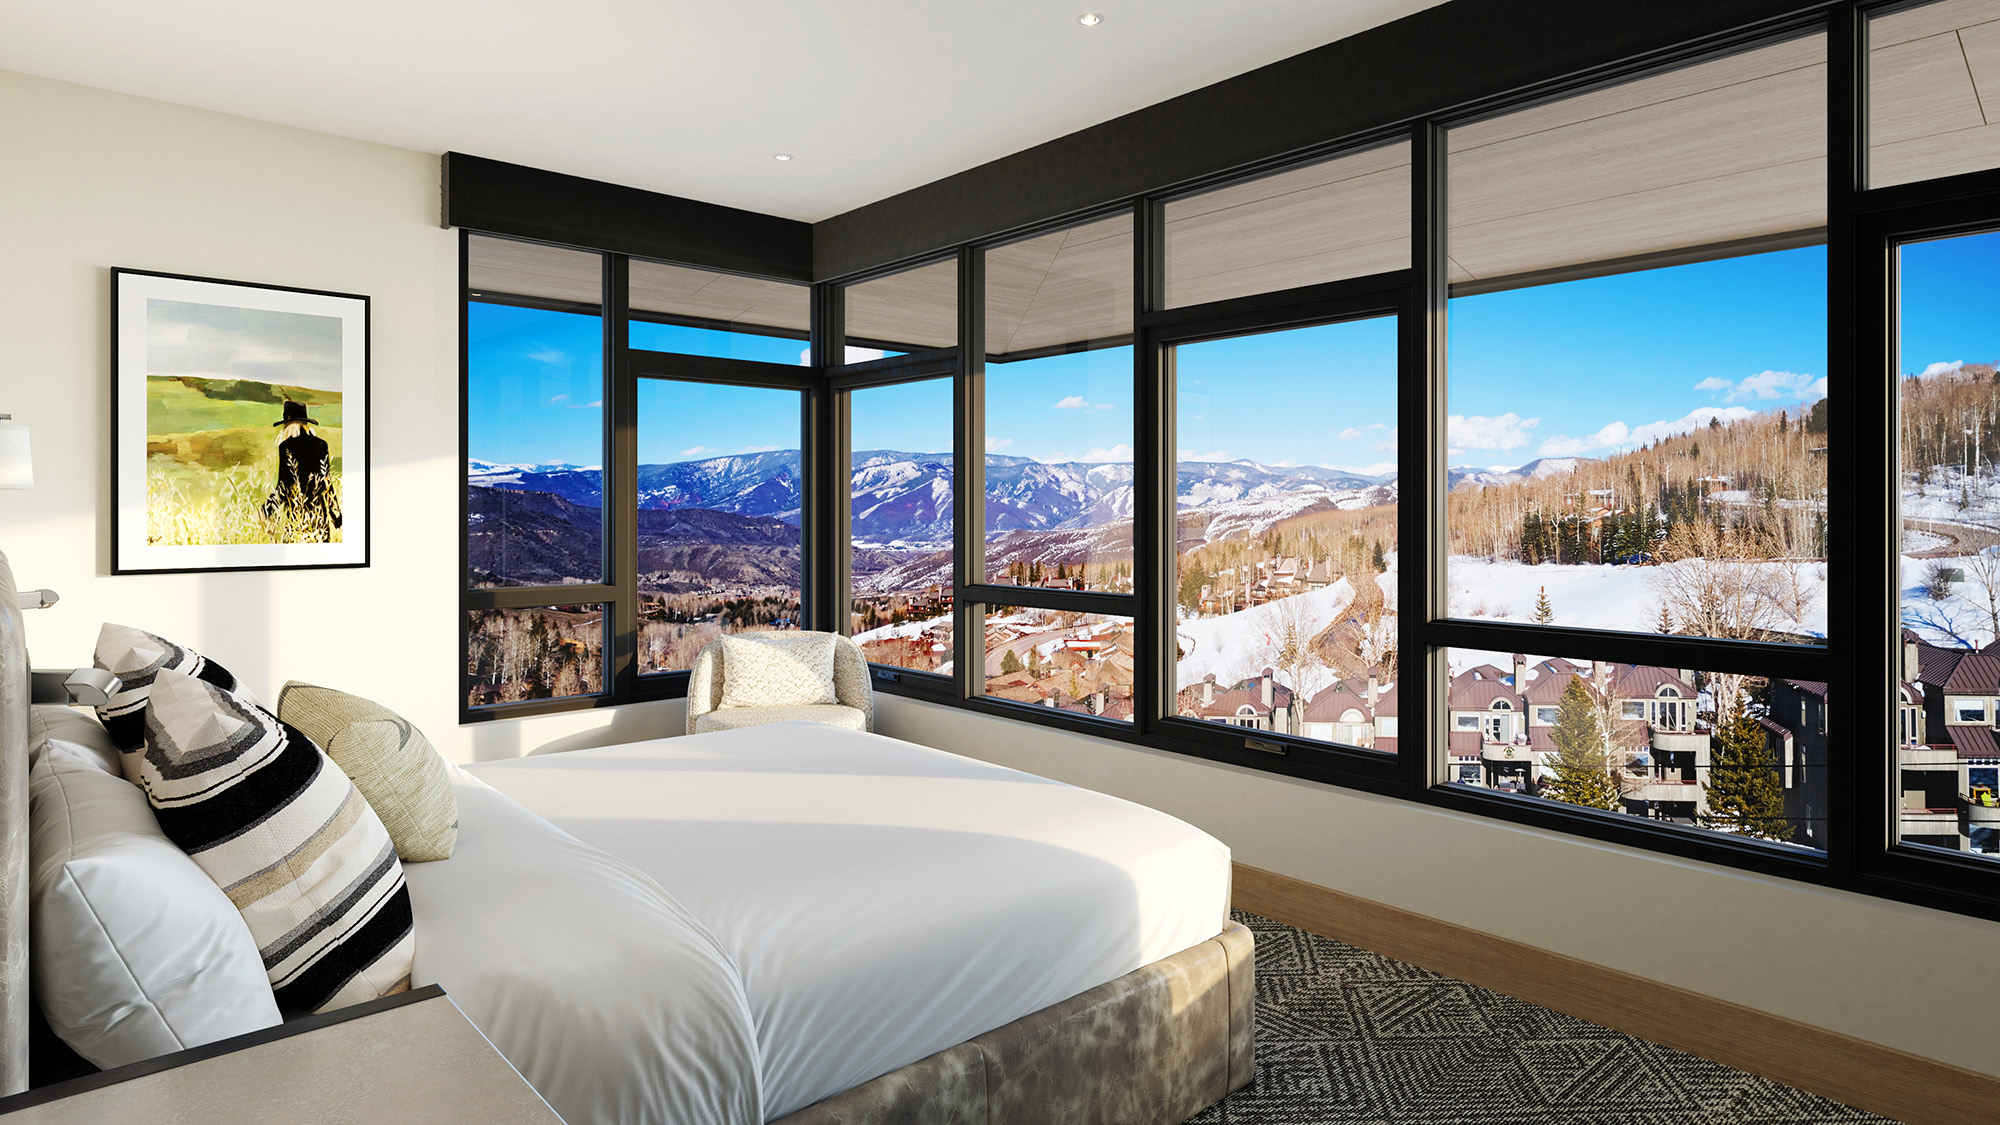 Bedroom Interior Rendering Cirque Residences at Viceroy Snowmass;